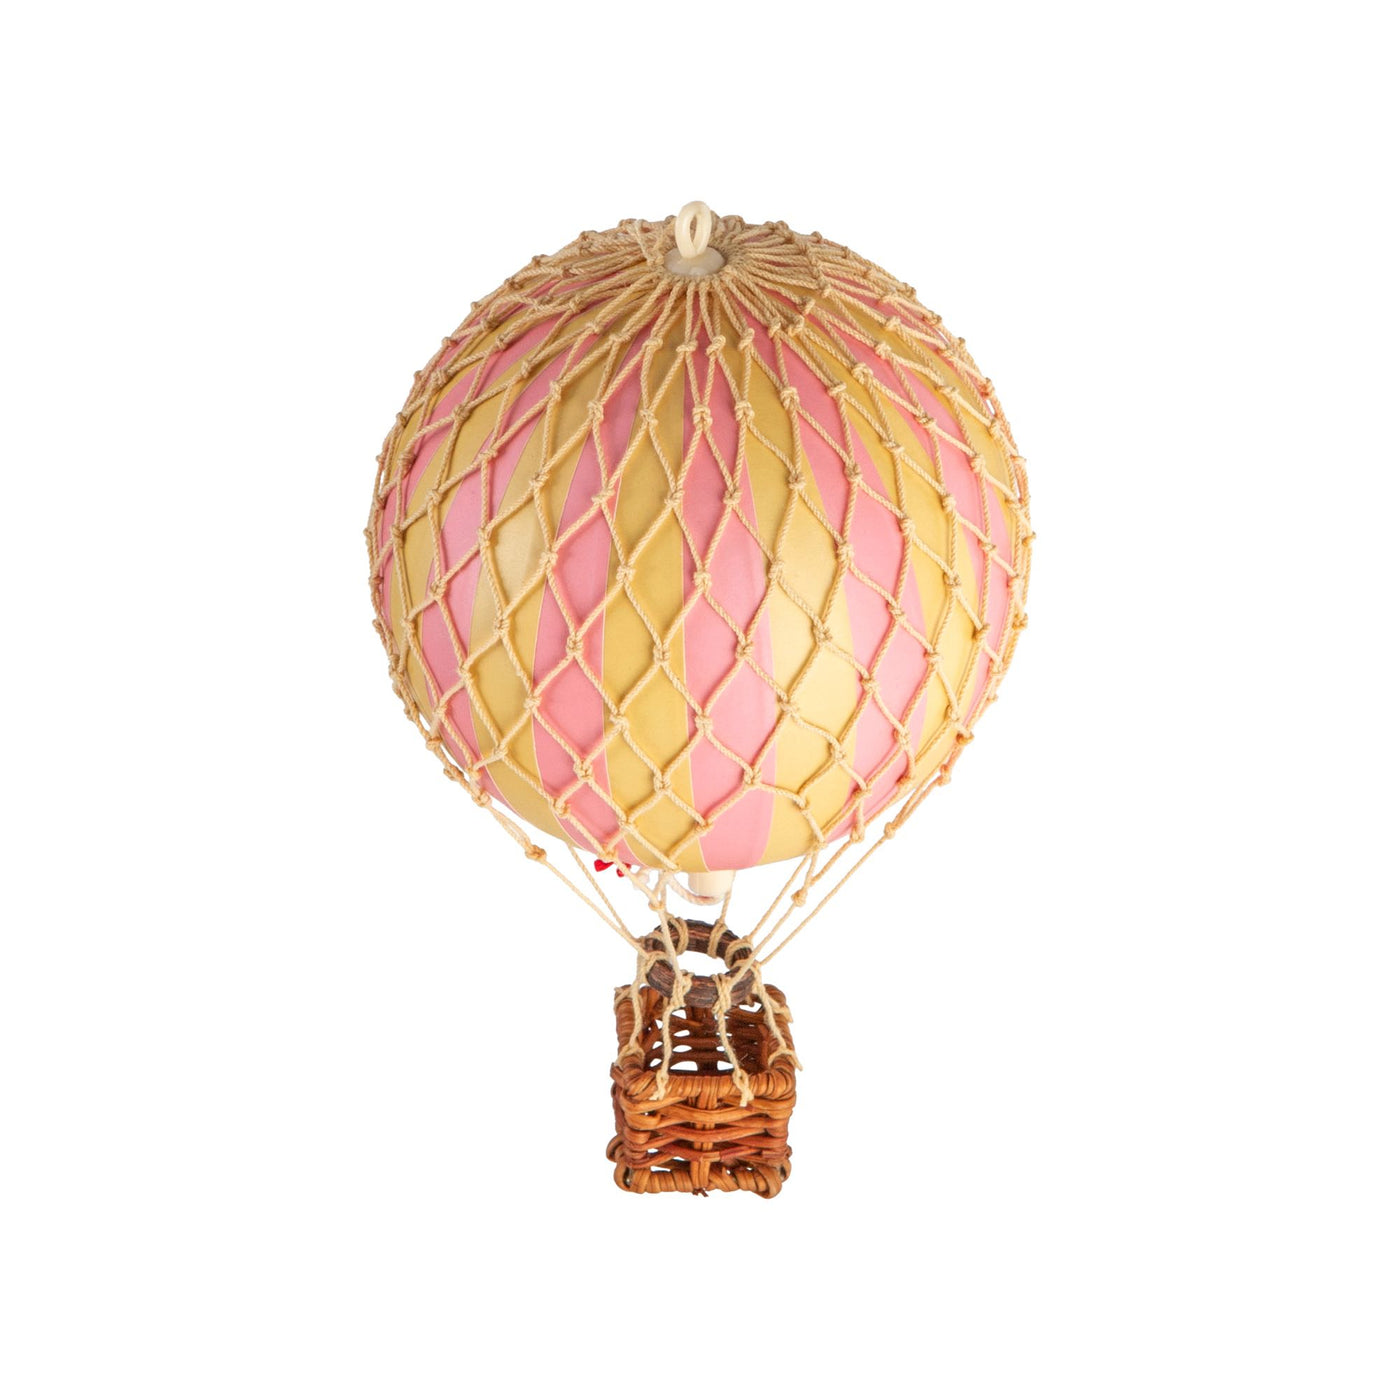 Luftballon Pink, 8,5 cm. Floating The Skies, Authentic Models